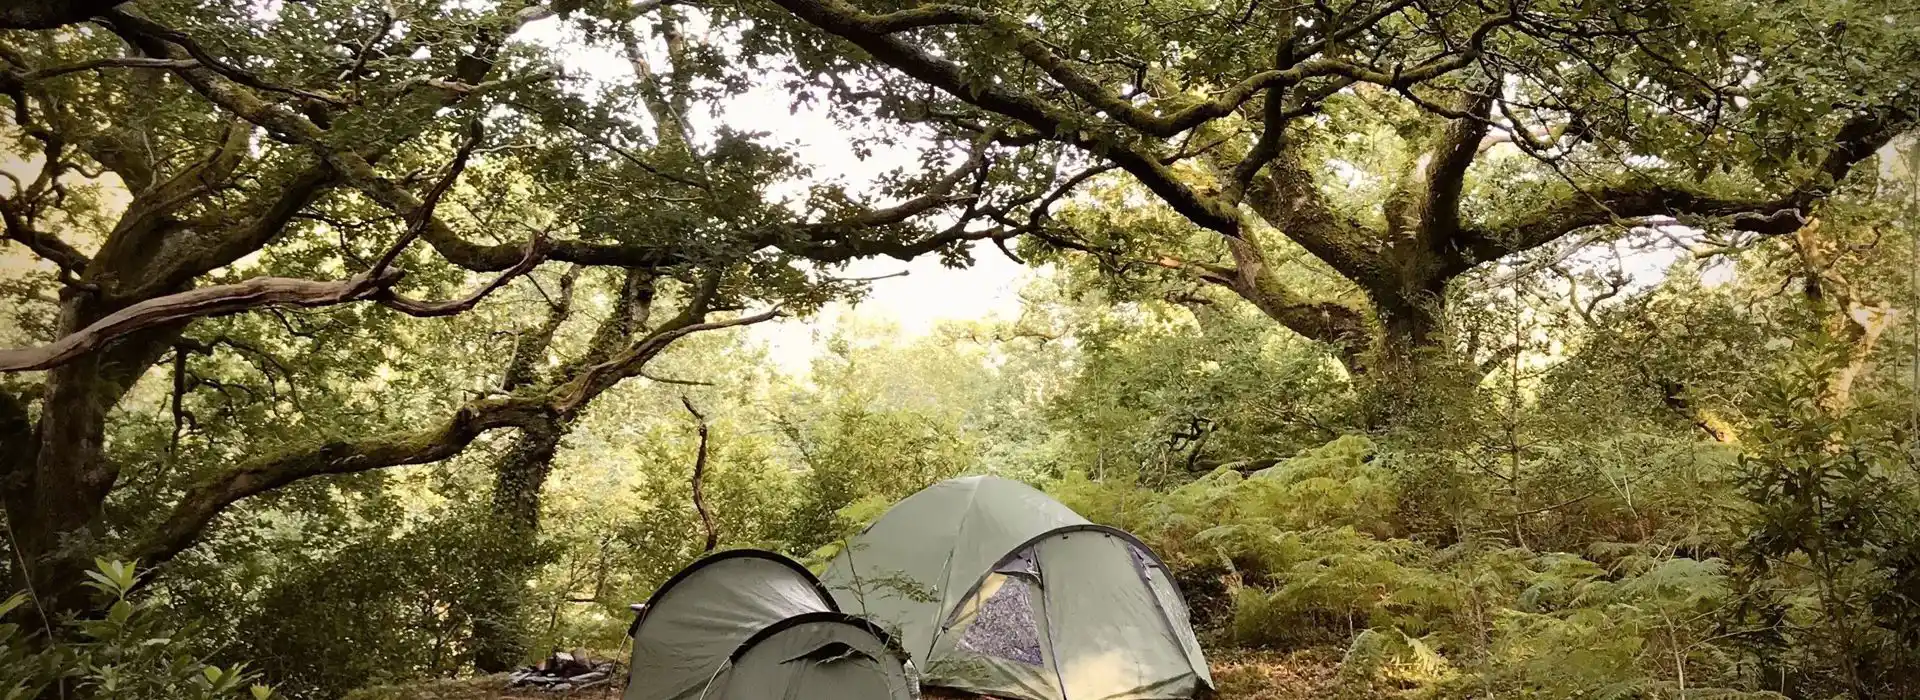 almost wild camping in Wales